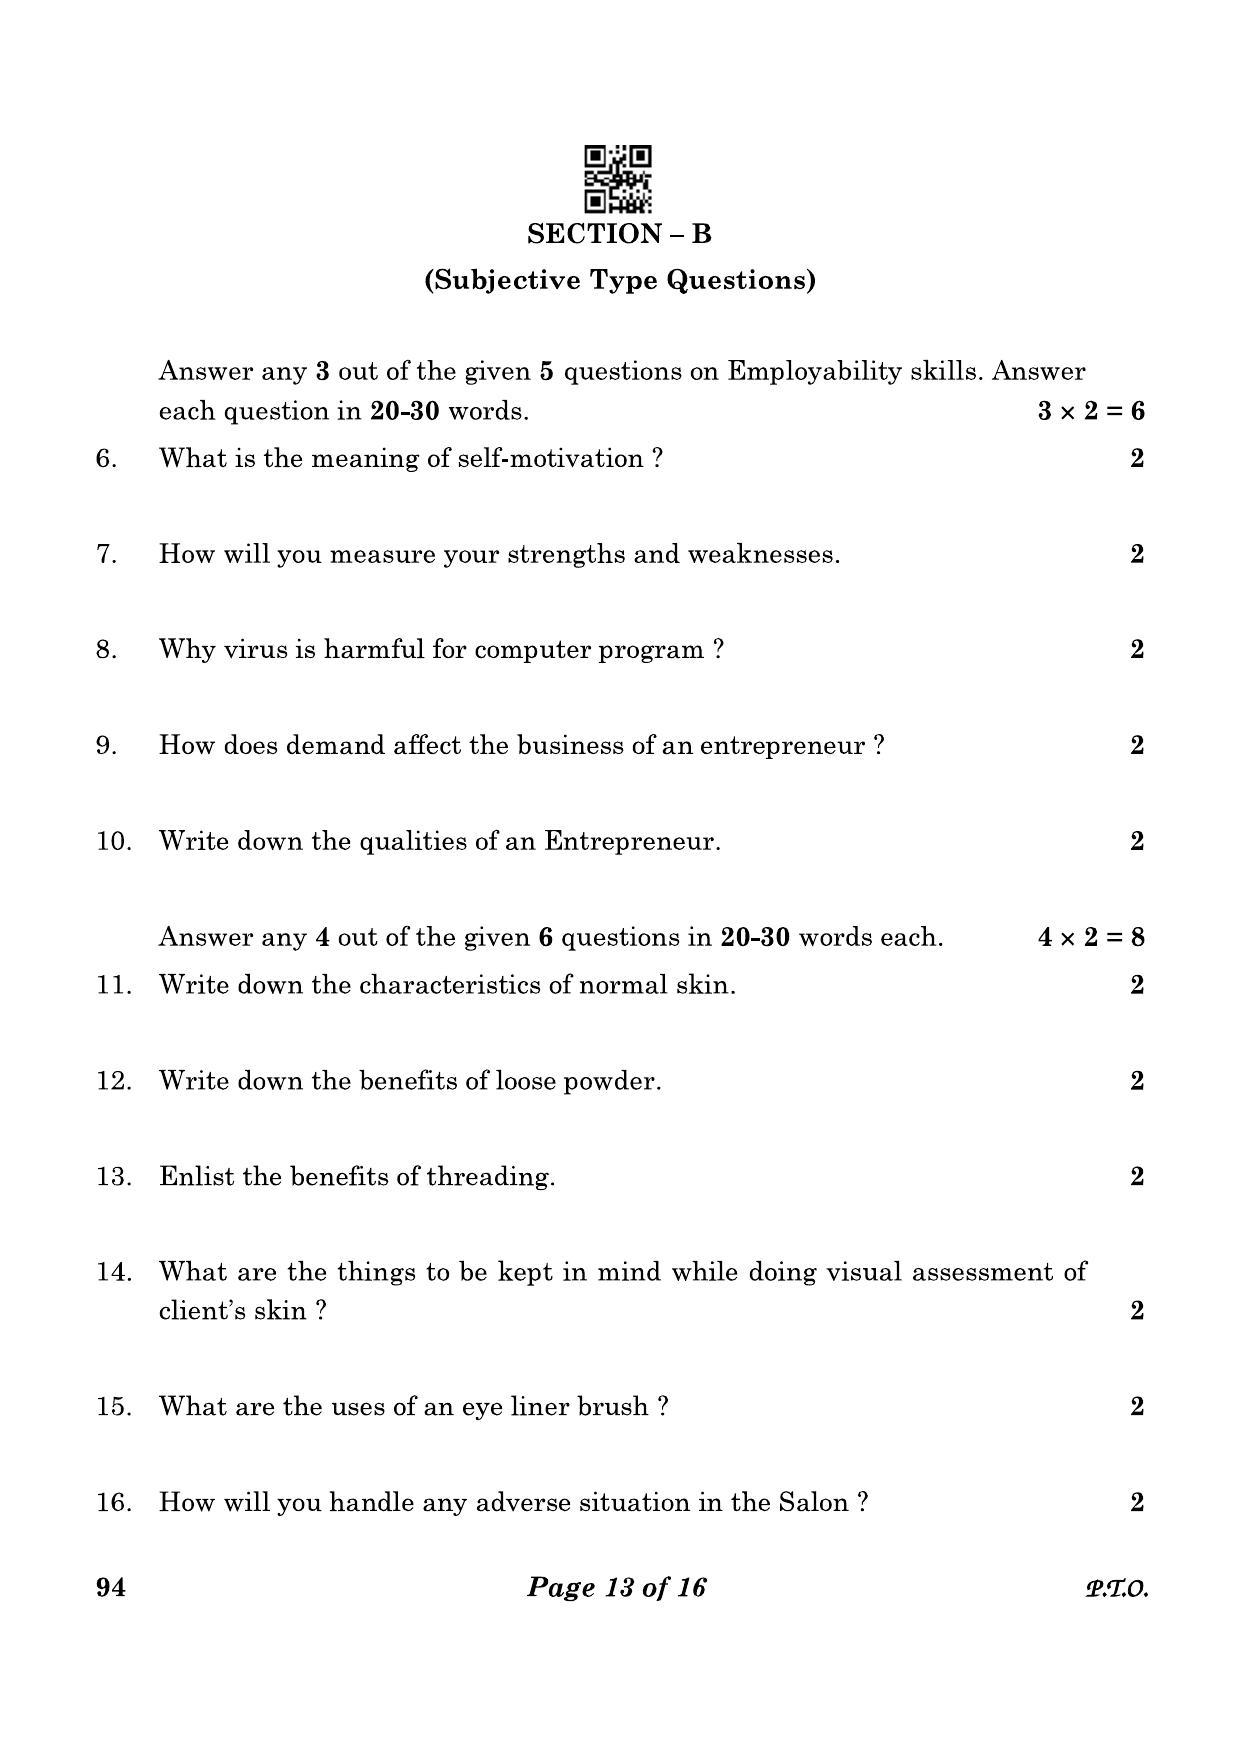 CBSE Class 10 94 Beauty And Wellness 2023 Question Paper - Page 13